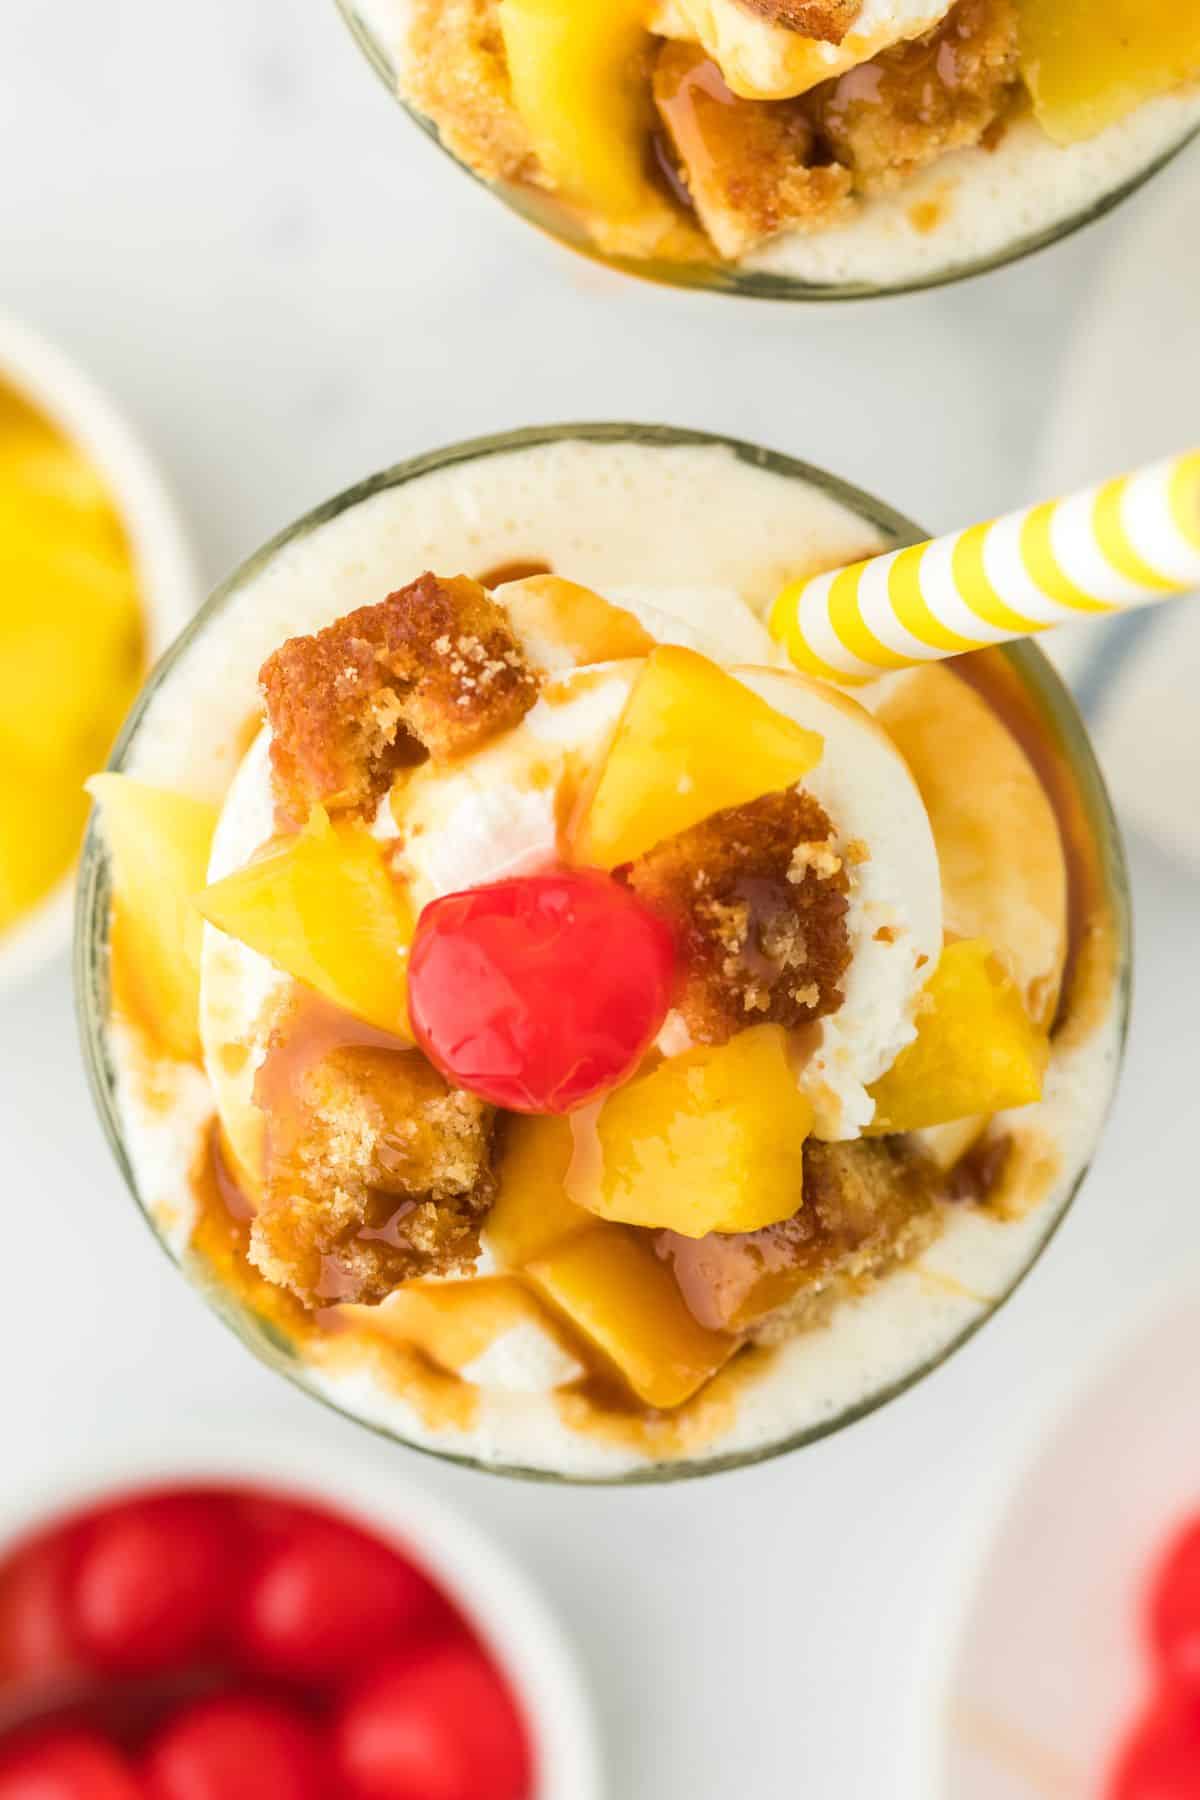 A pineapple shake topped with cake, pineapple pieces, and a cherry.